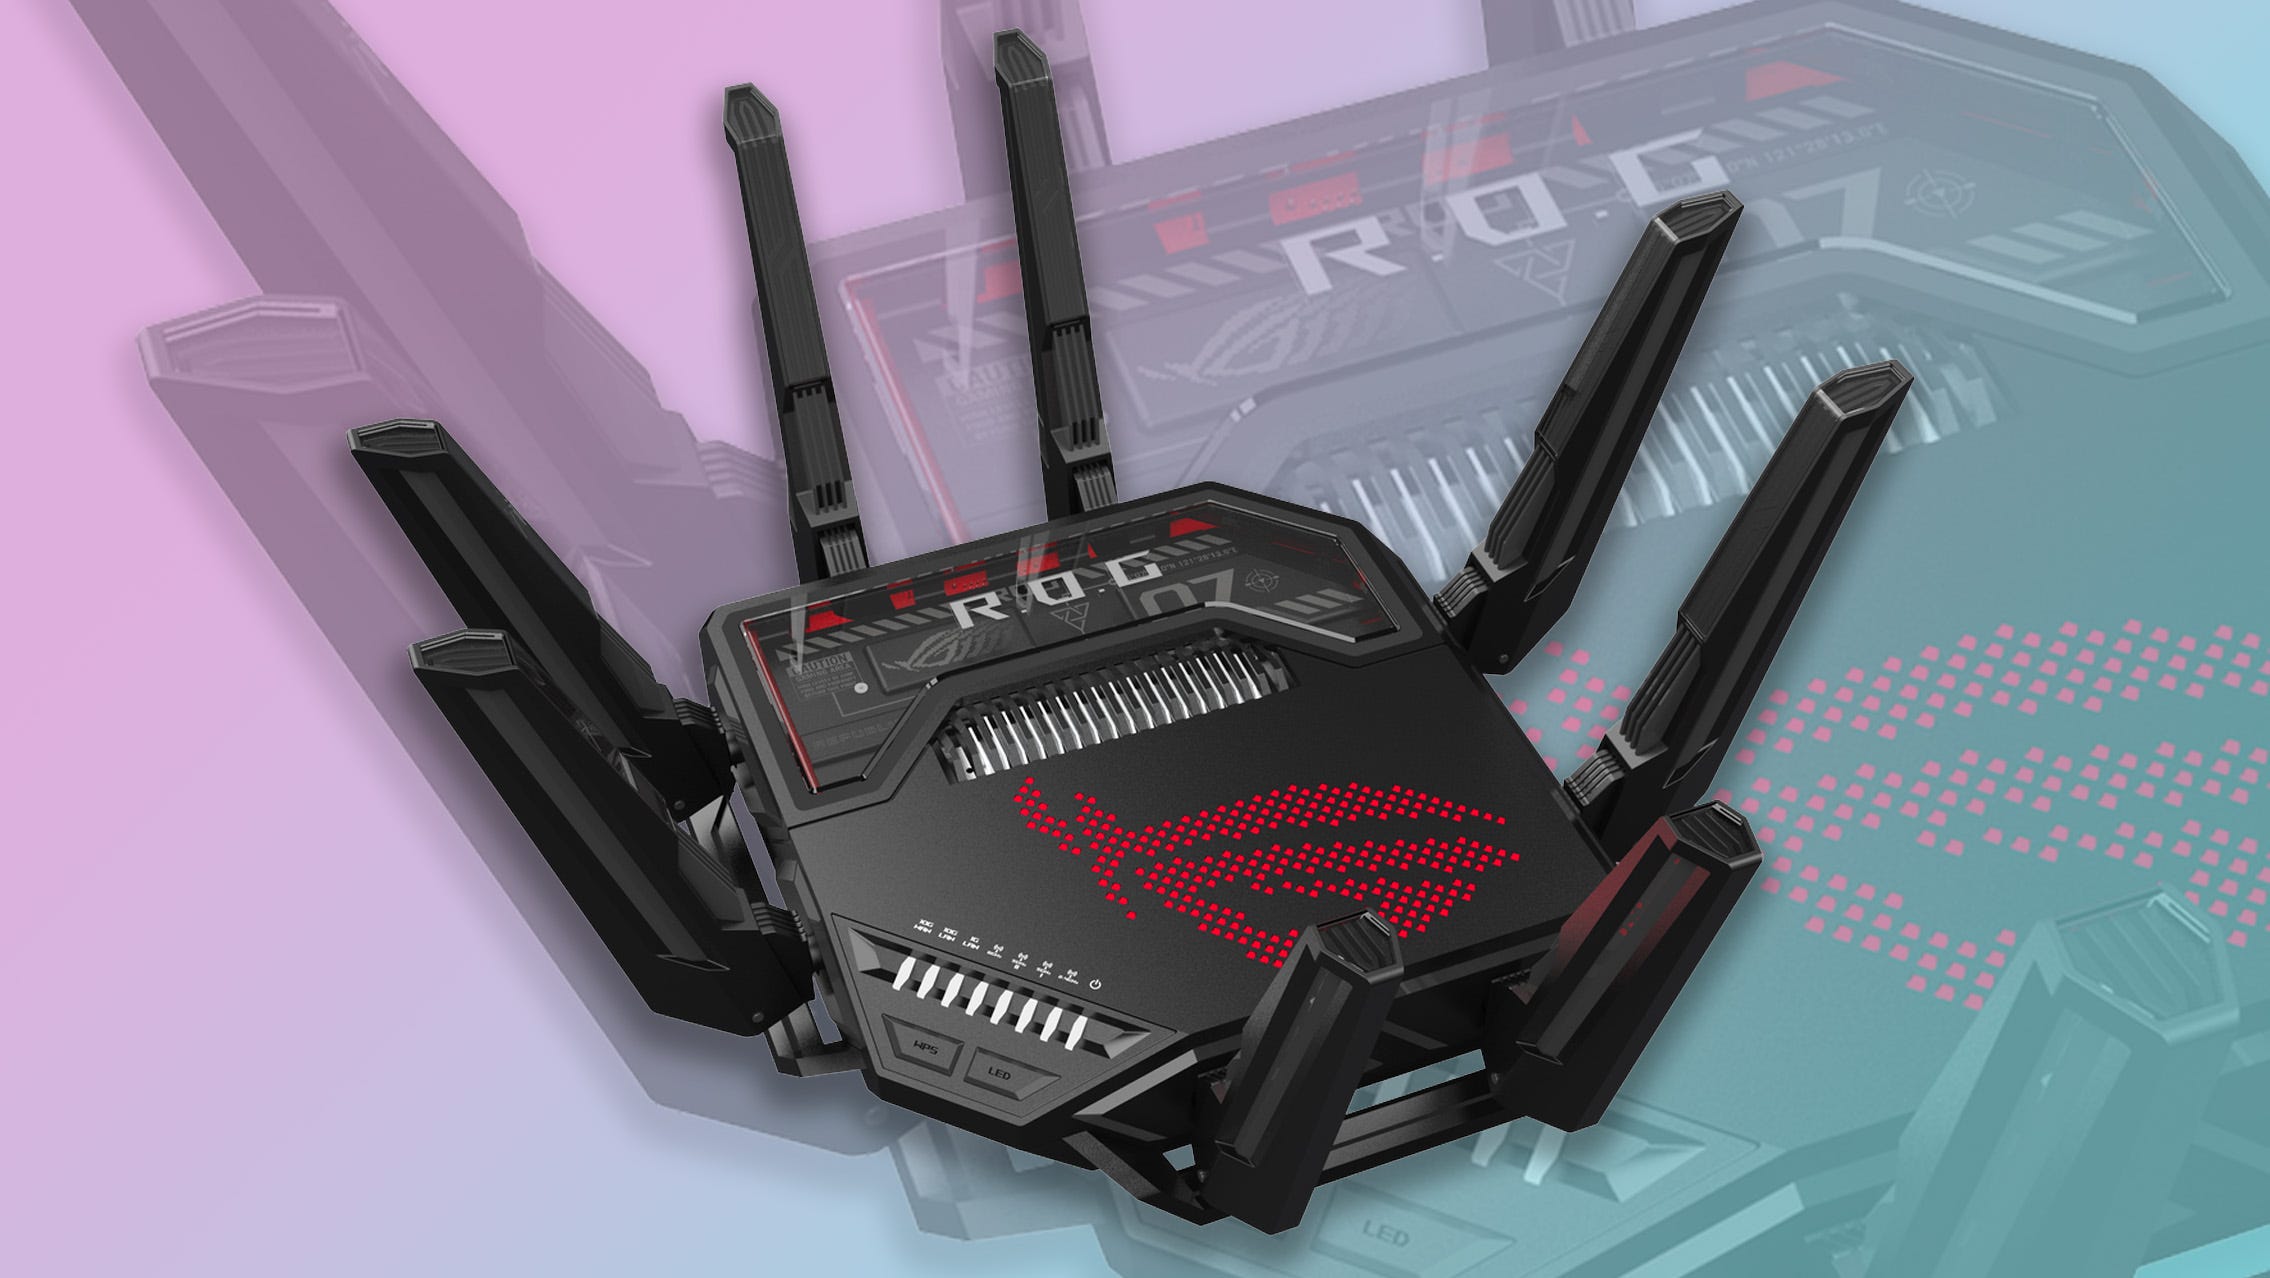 WiFi 7 is here with the ASUS ROG GT-BE98